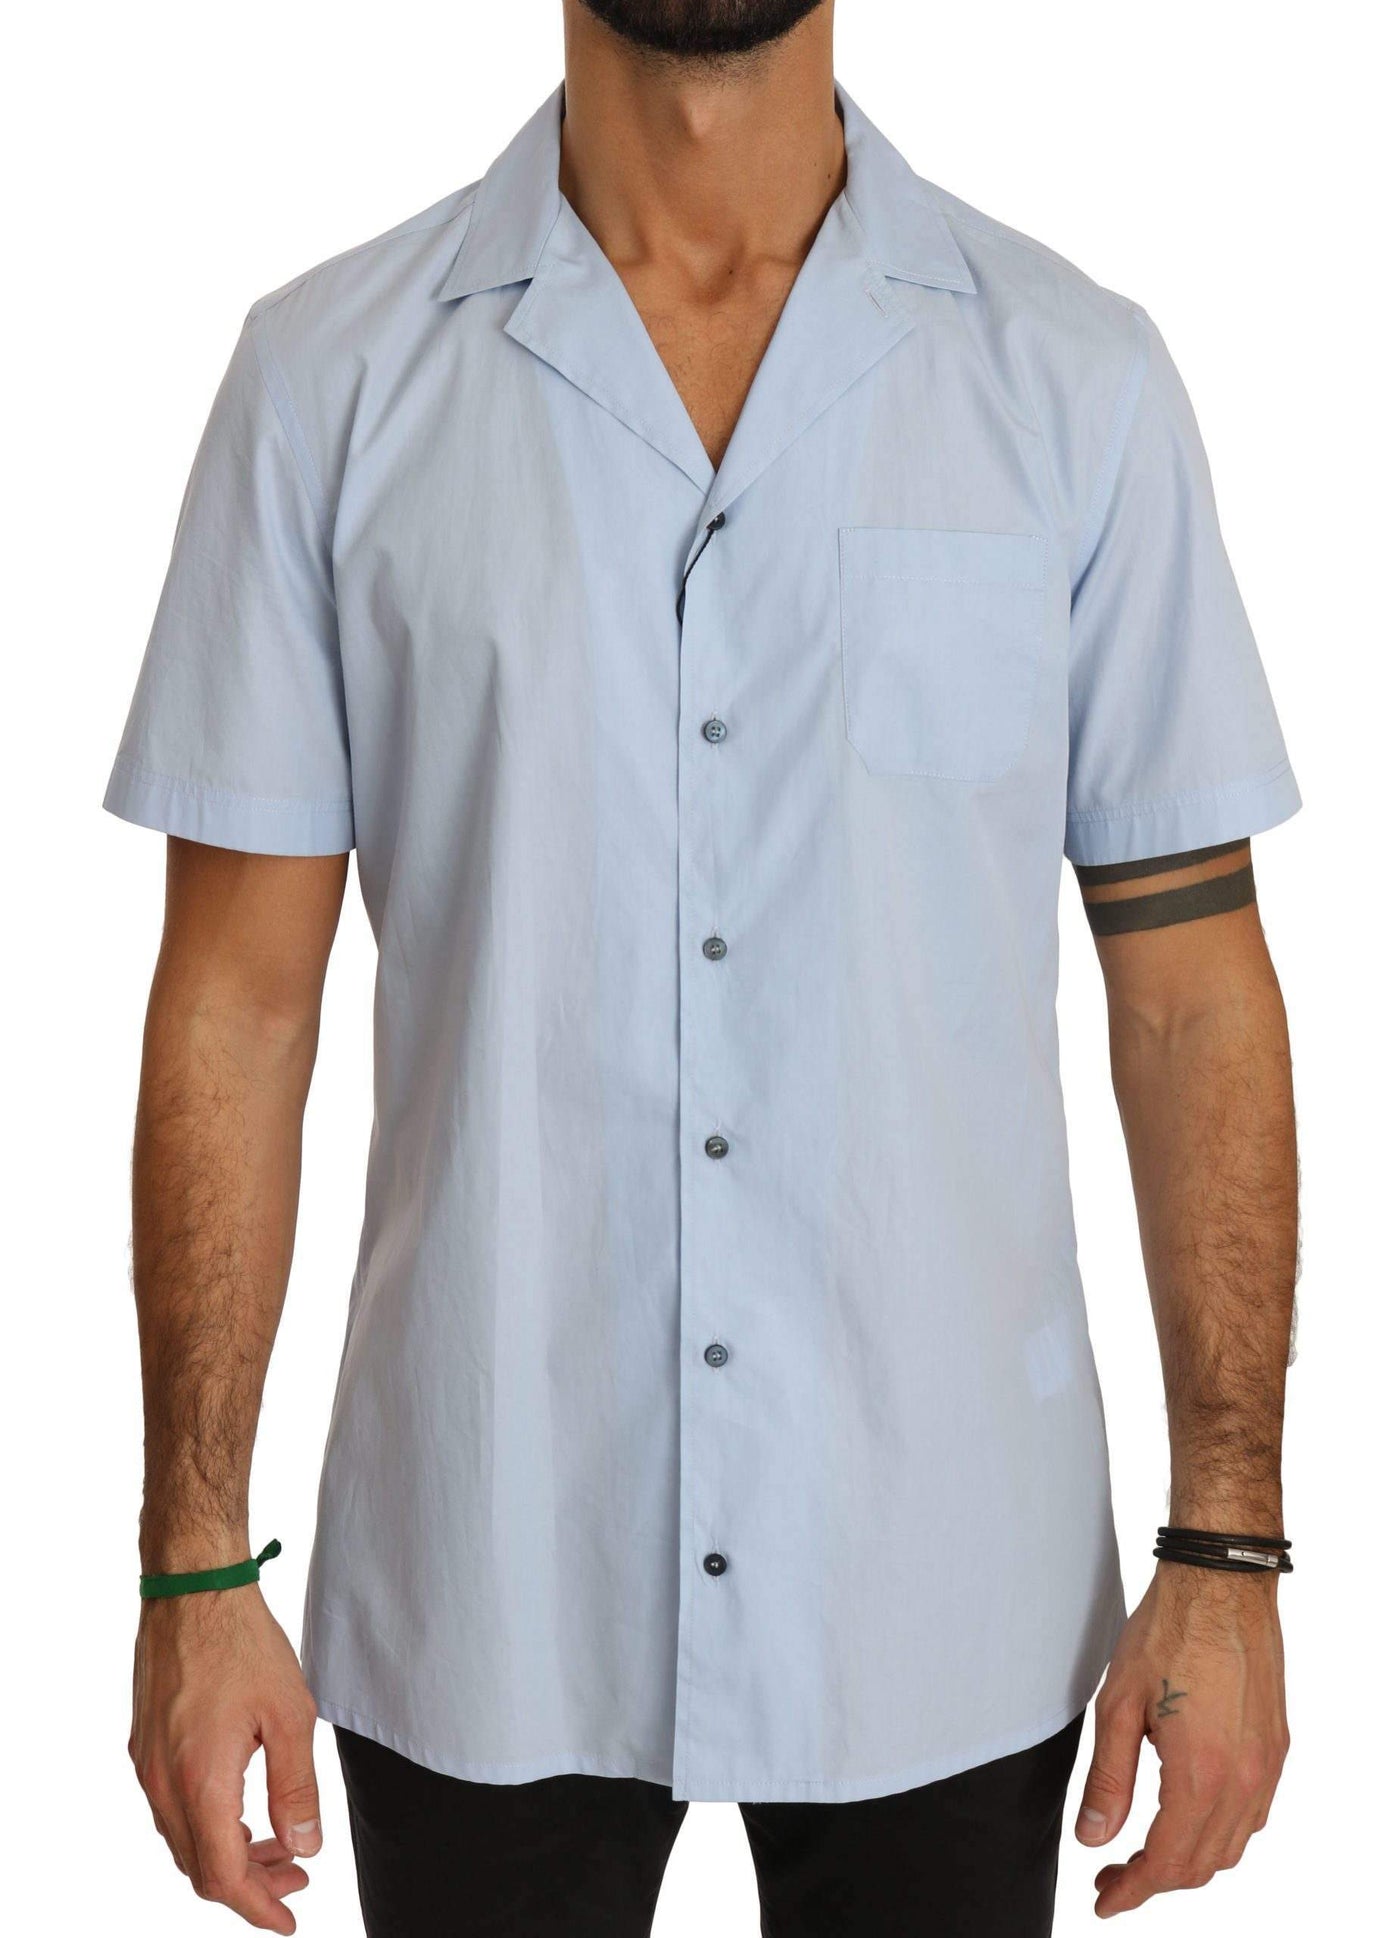 Dolce & Gabbana Blue Short Sleeve 100% Cotton Top Shirt #men, Blue, Brand_Dolce & Gabbana, Dolce & Gabbana, feed-agegroup-adult, feed-color-blue, feed-gender-male, feed-size-IT40 | M, Gender_Men, IT40 | M, Men - New Arrivals, Shirts - Men - Clothing at SEYMAYKA